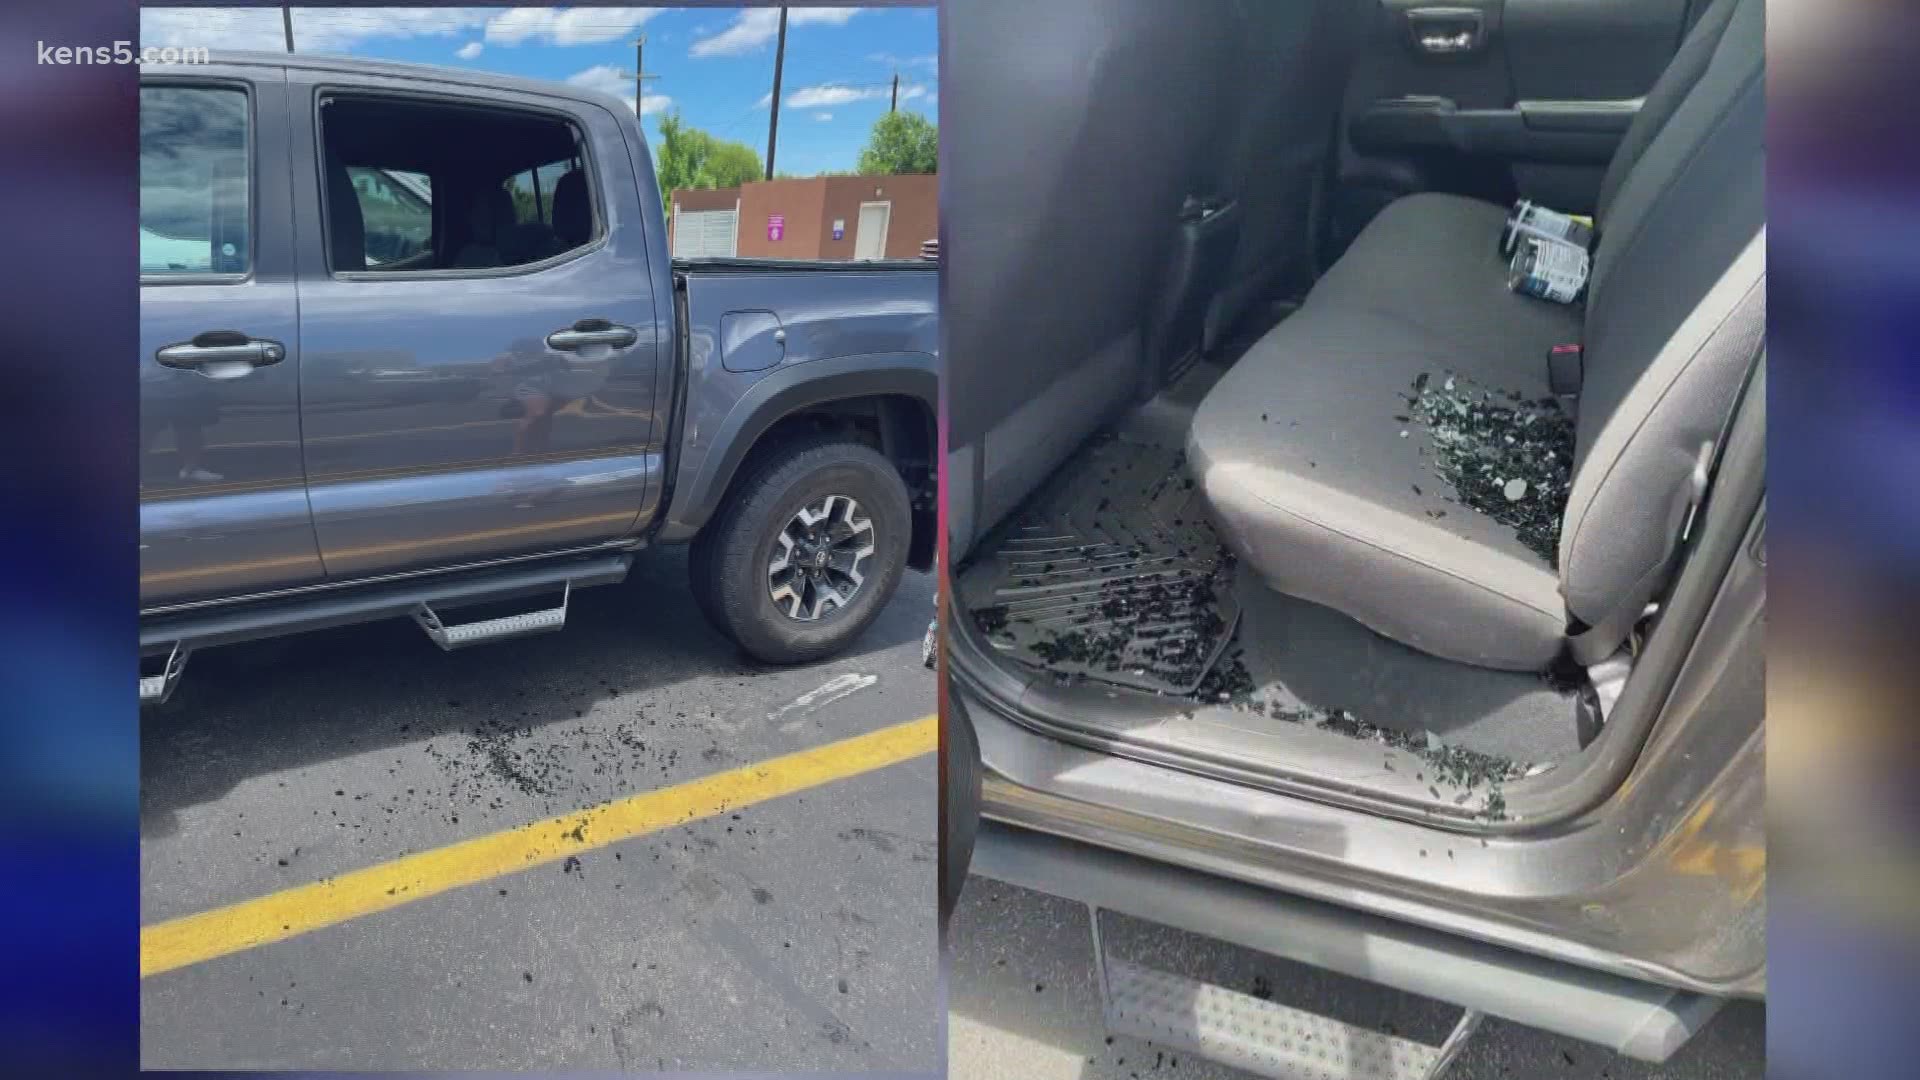 Thieves targeted a hotel to break into cars, and one of the victims is an airman who's training in S.A. The suspects stole all of his gear and trashed his truck.